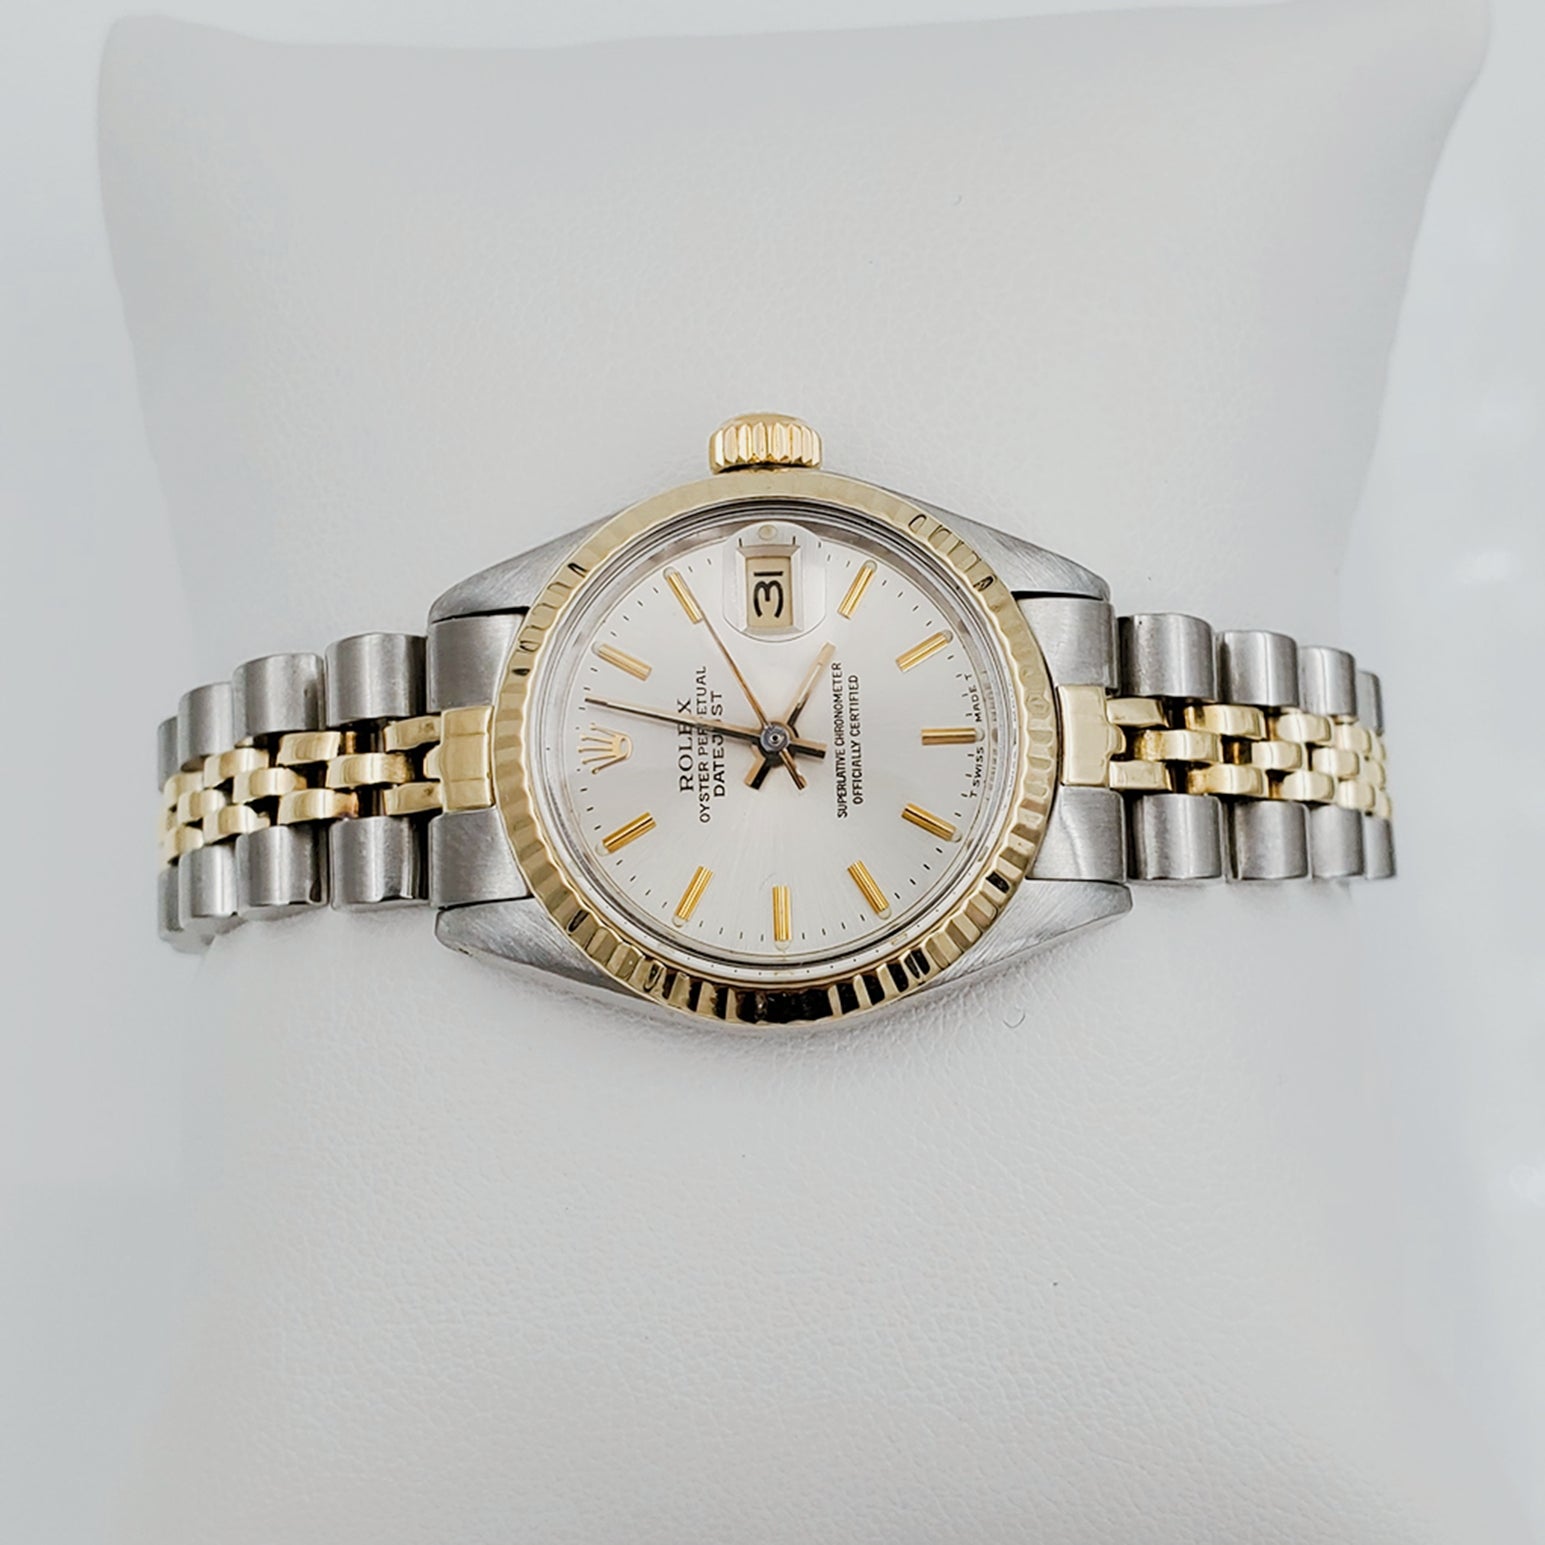 Ladies Rolex 26mm DateJust Two Tone 14K Yellow Gold / Stainless Steel Watch with Silver Dial and 14k Fluted Bezel. (Pre-Owned)